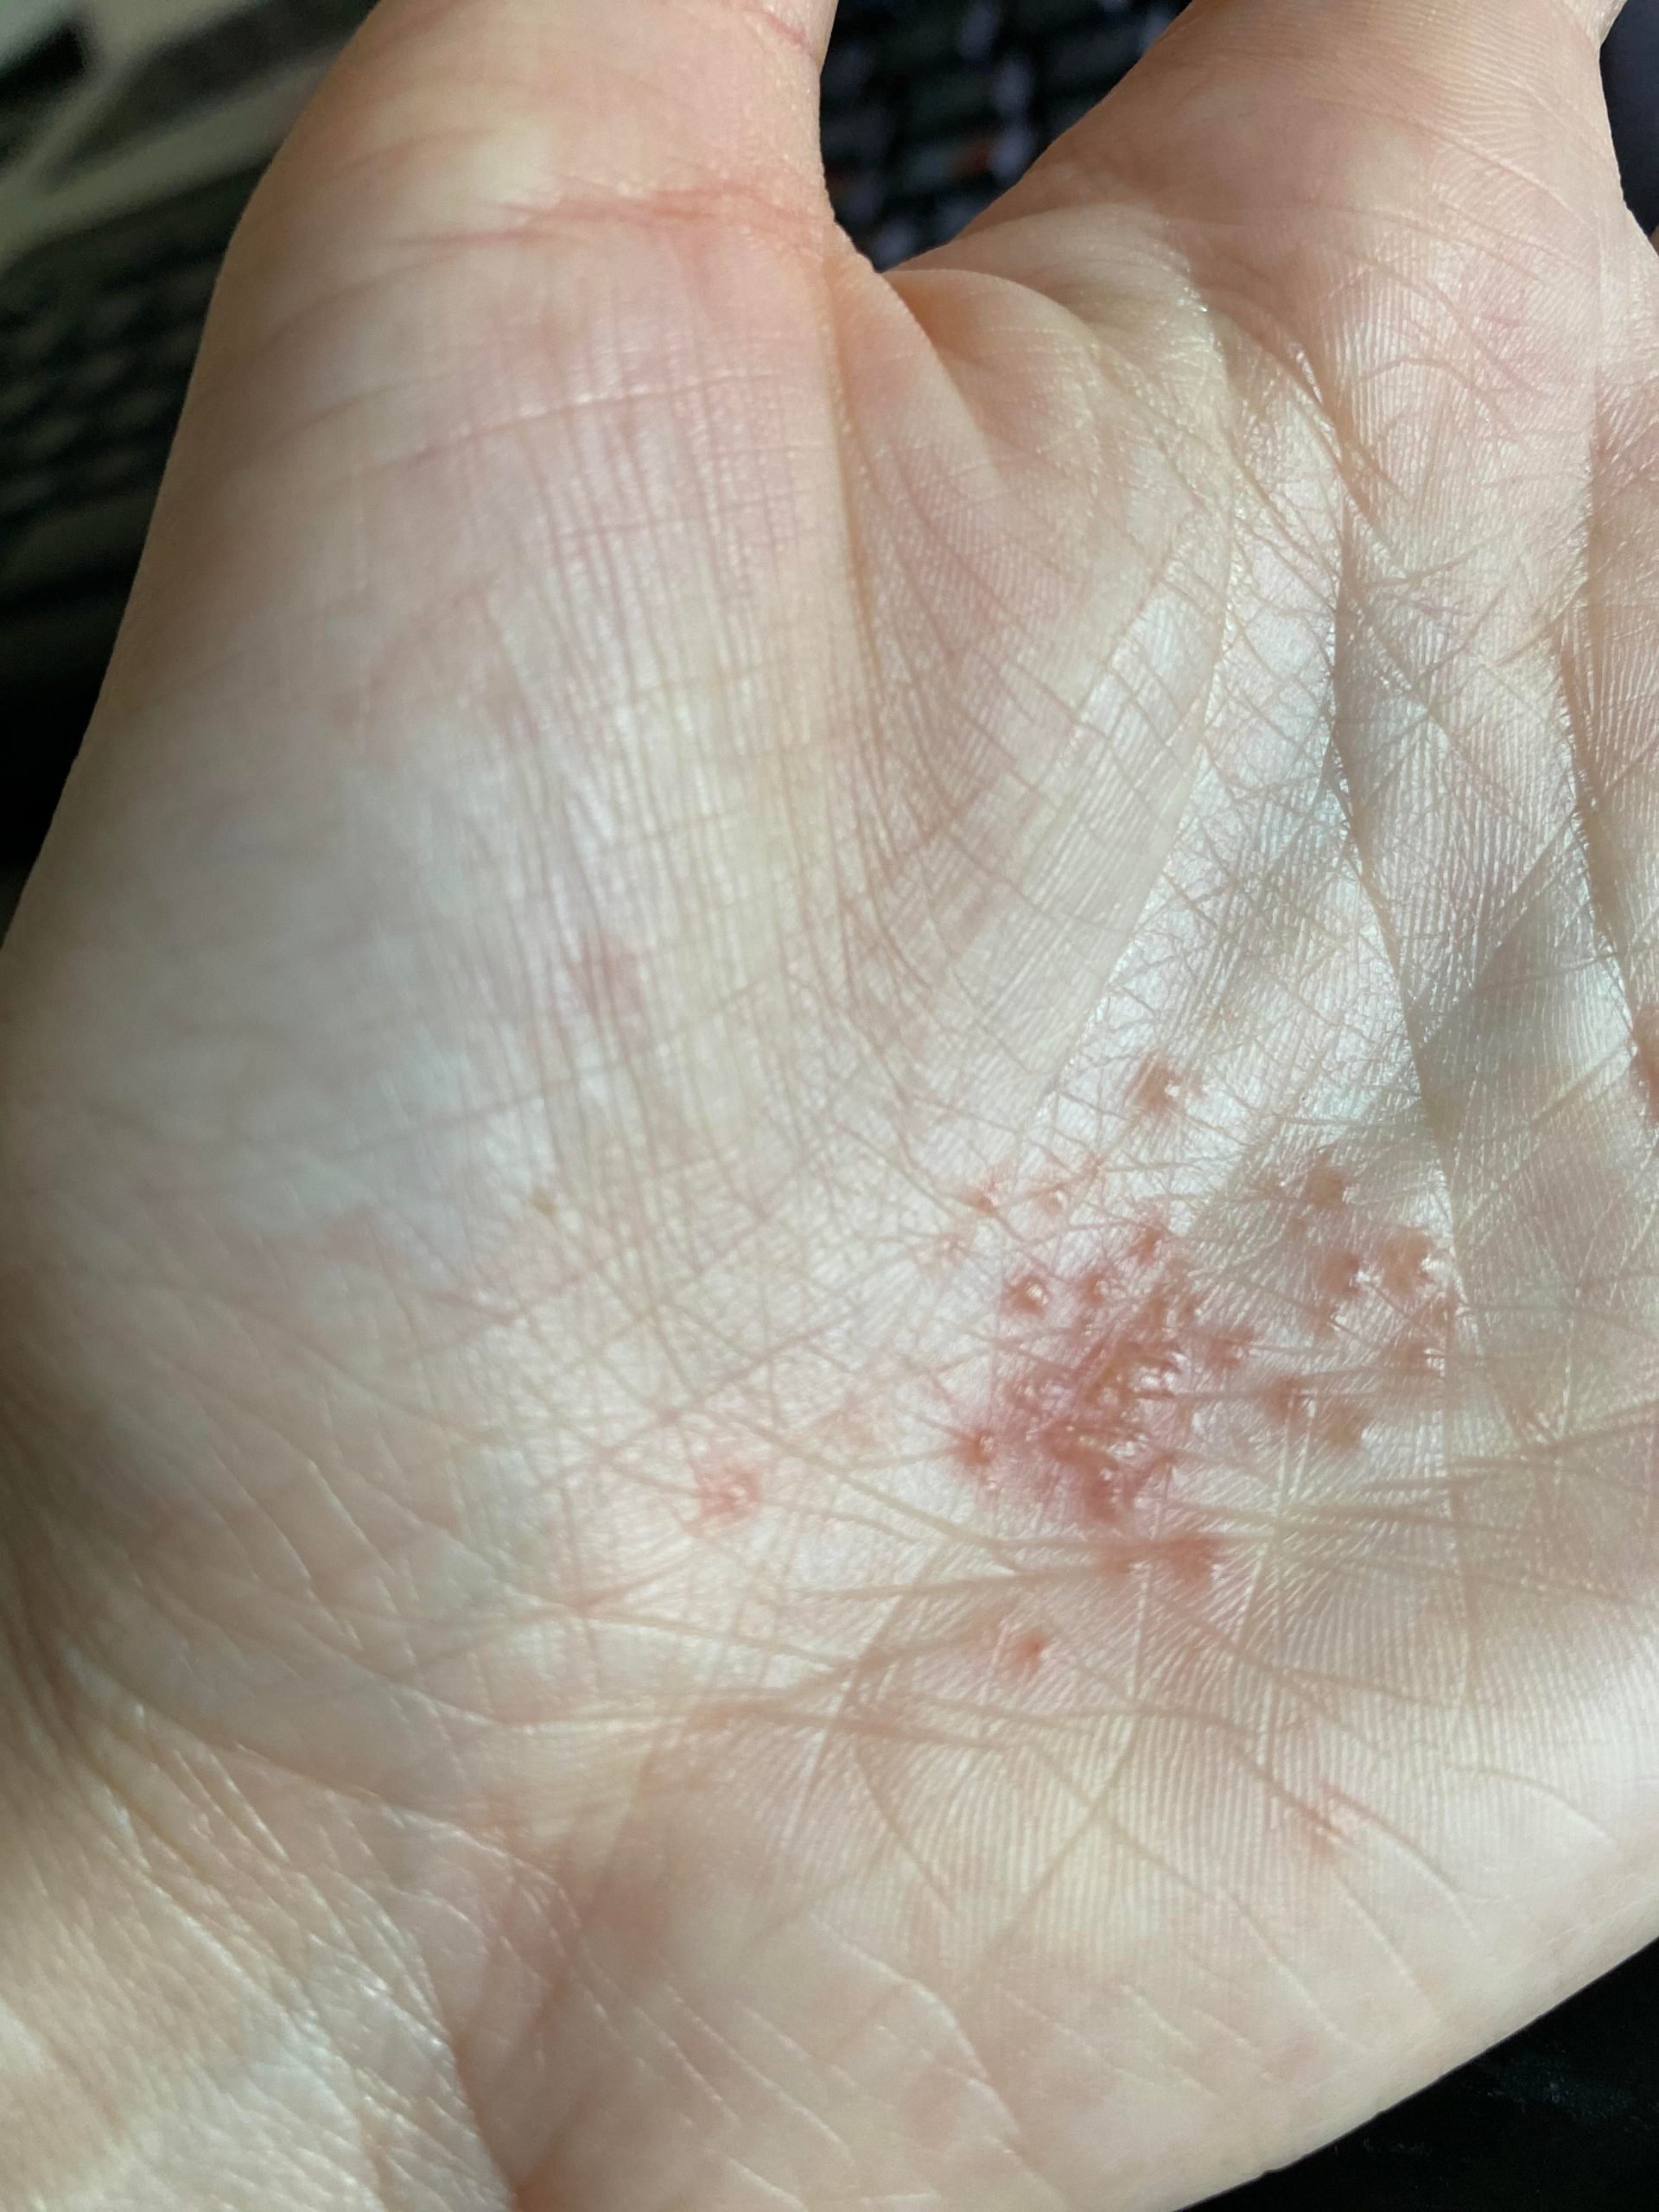 Does this look like eczema? I thought it may be scabies ...